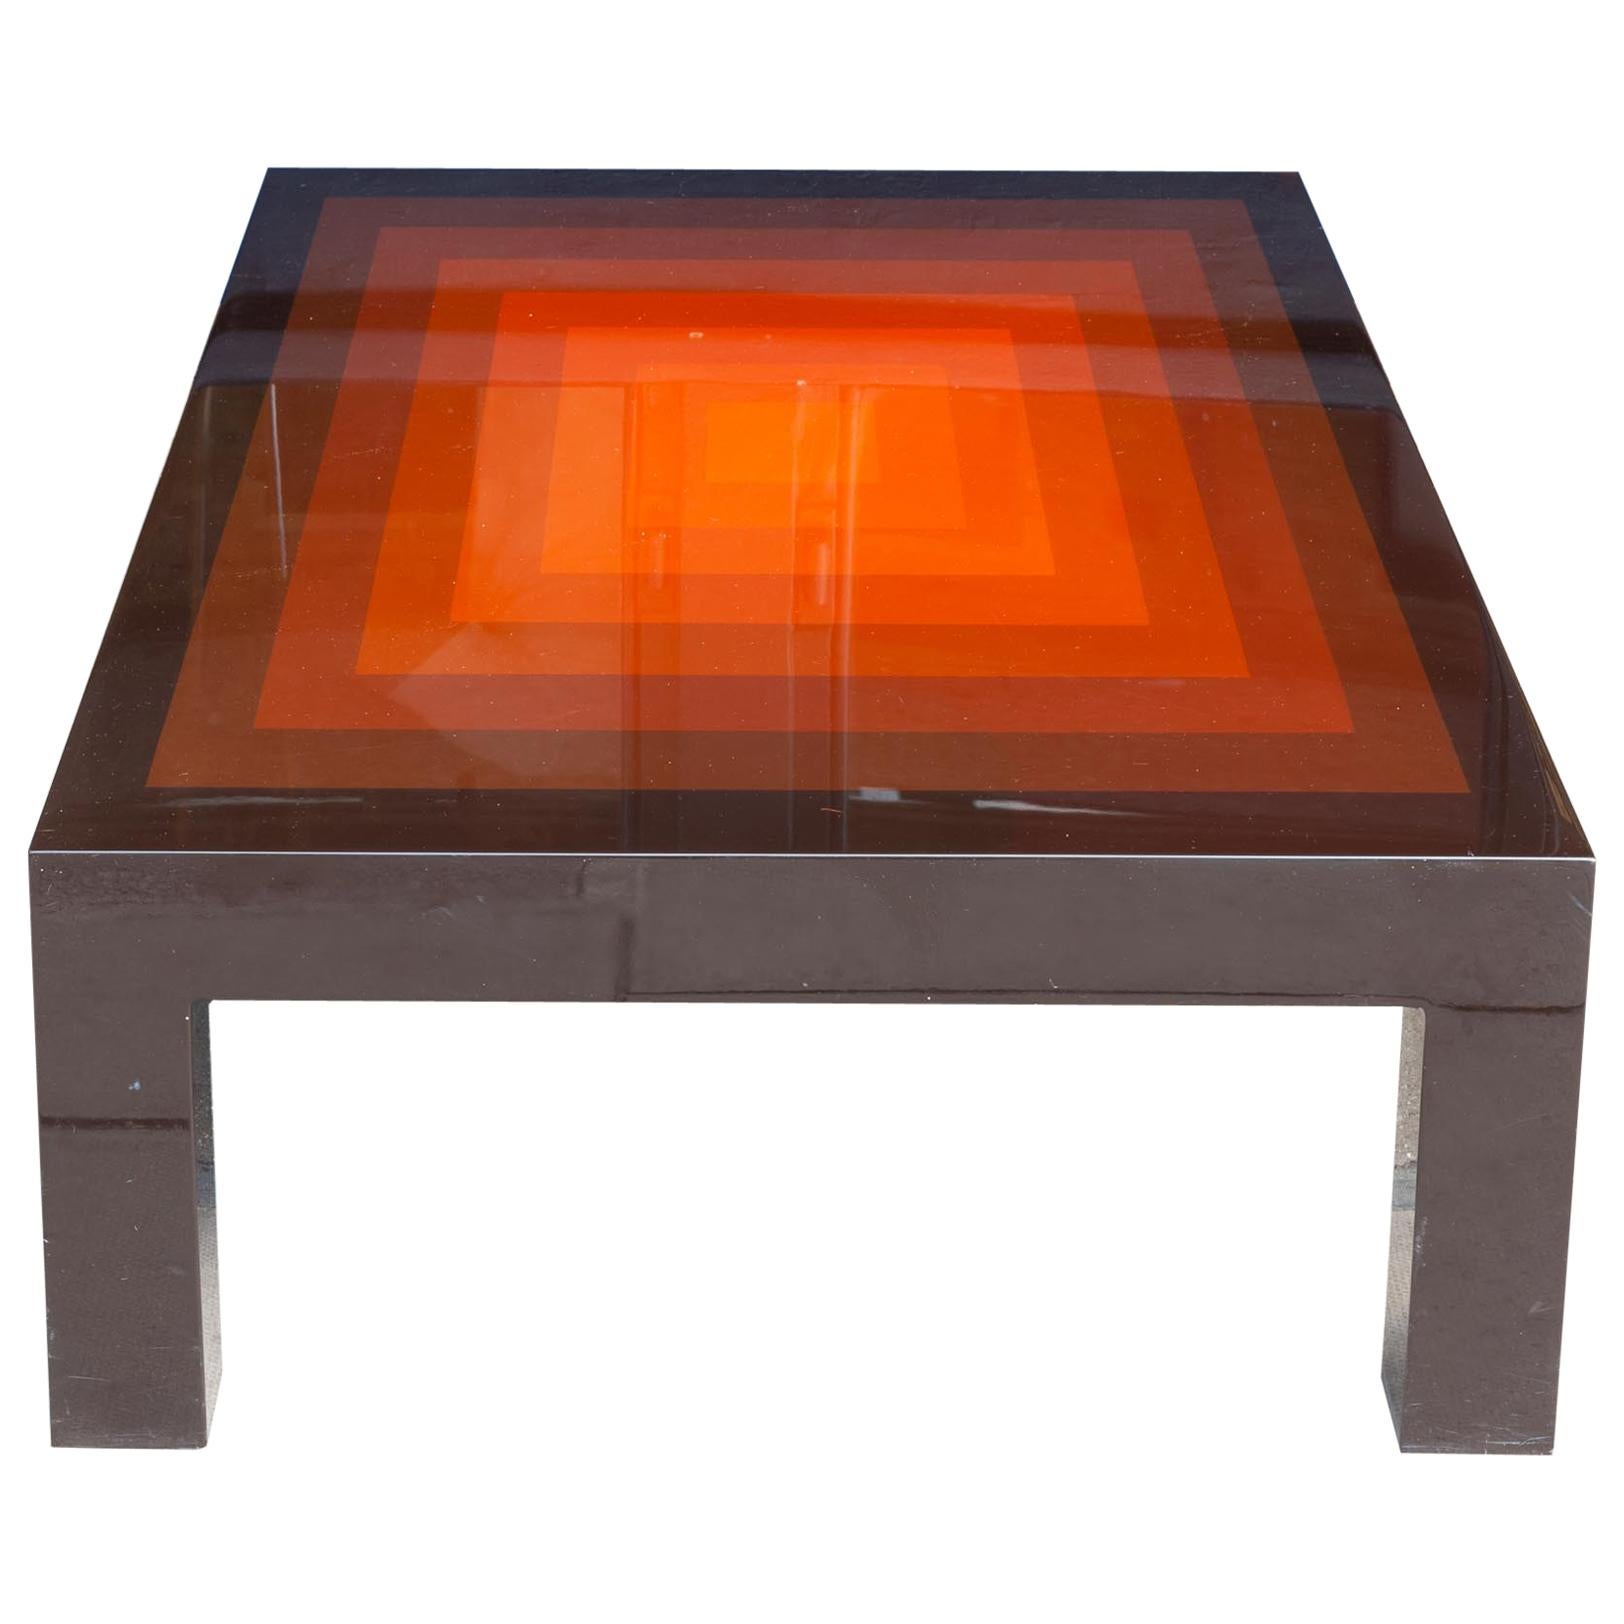 1970s Rectangular Multi-Colored Brown and Orange High Gloss Coffee Table